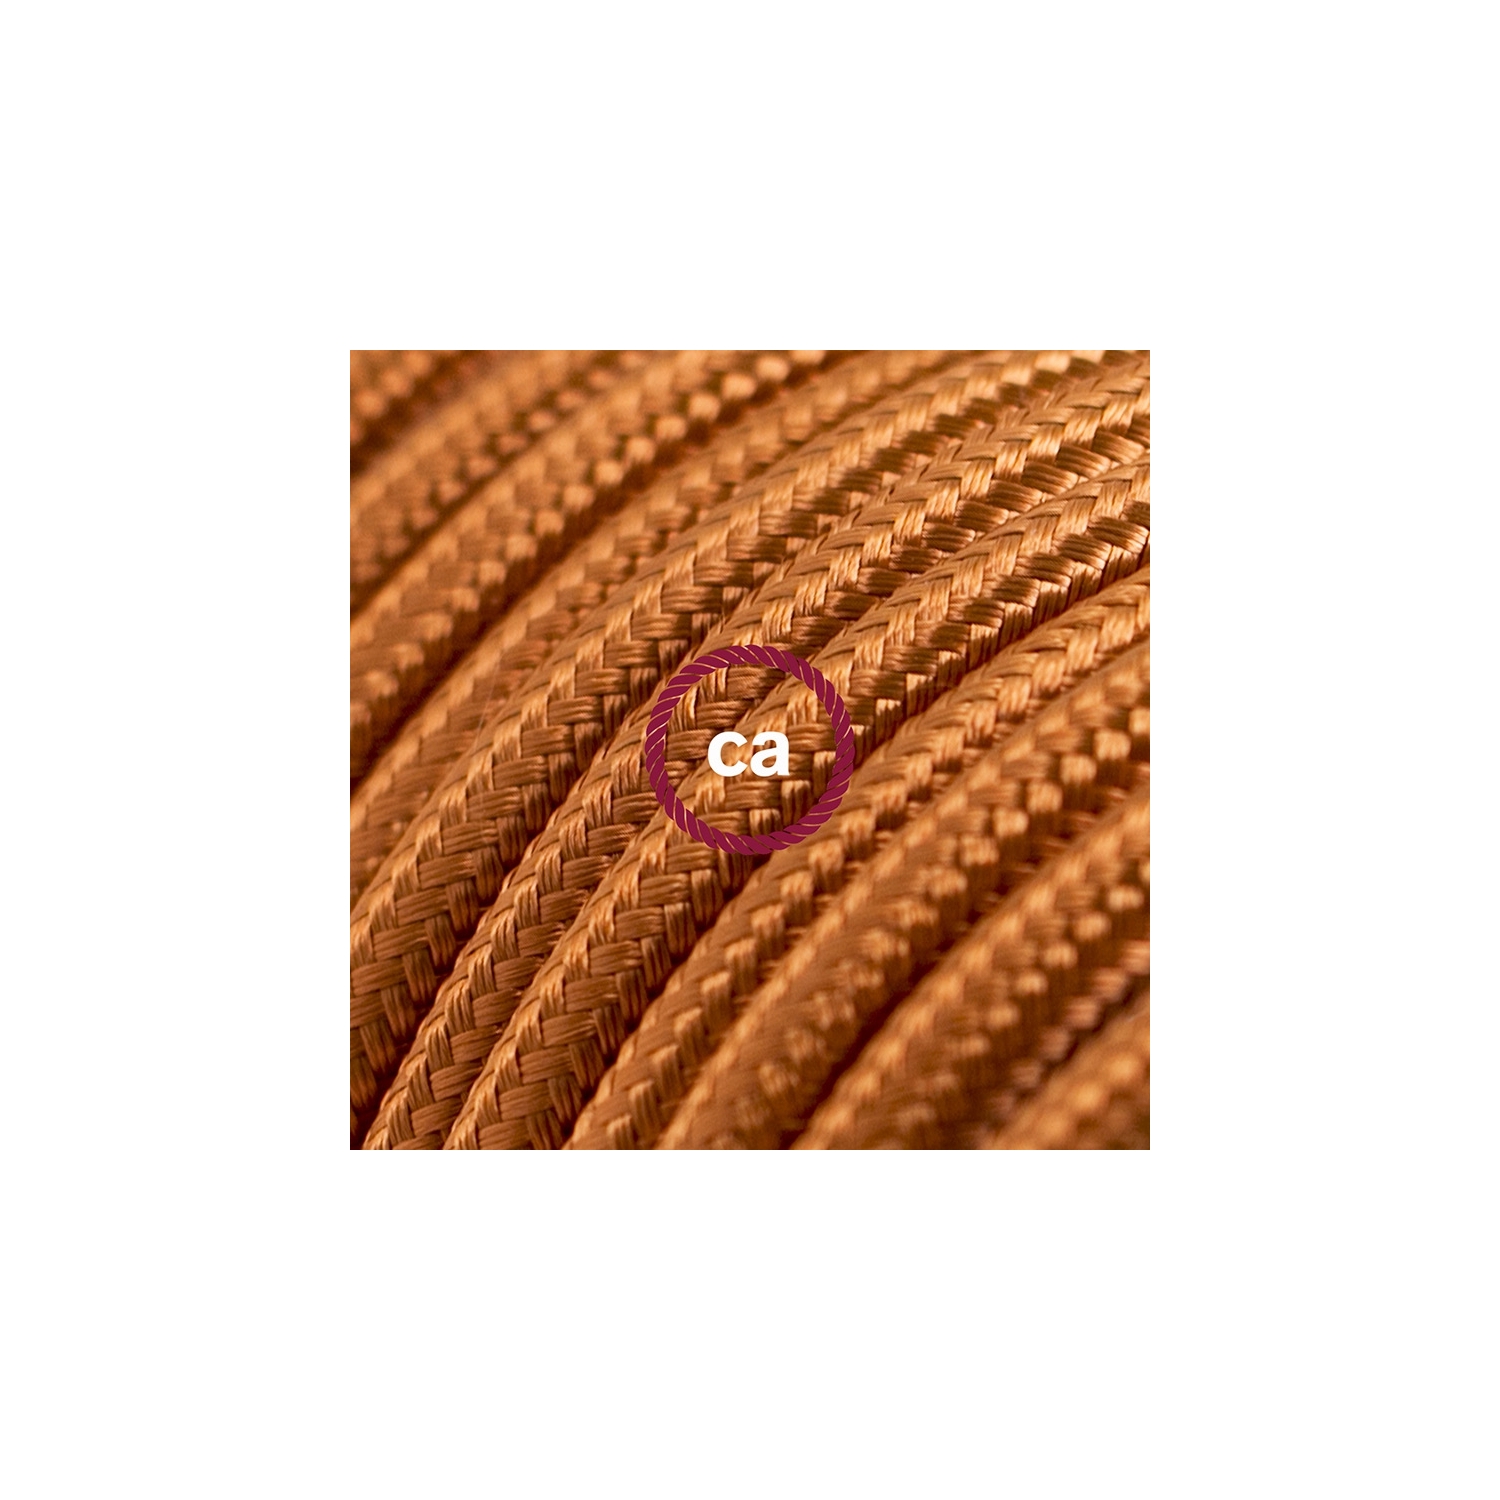 Cord-set - RM22 Copper Rayon Covered Round Cable